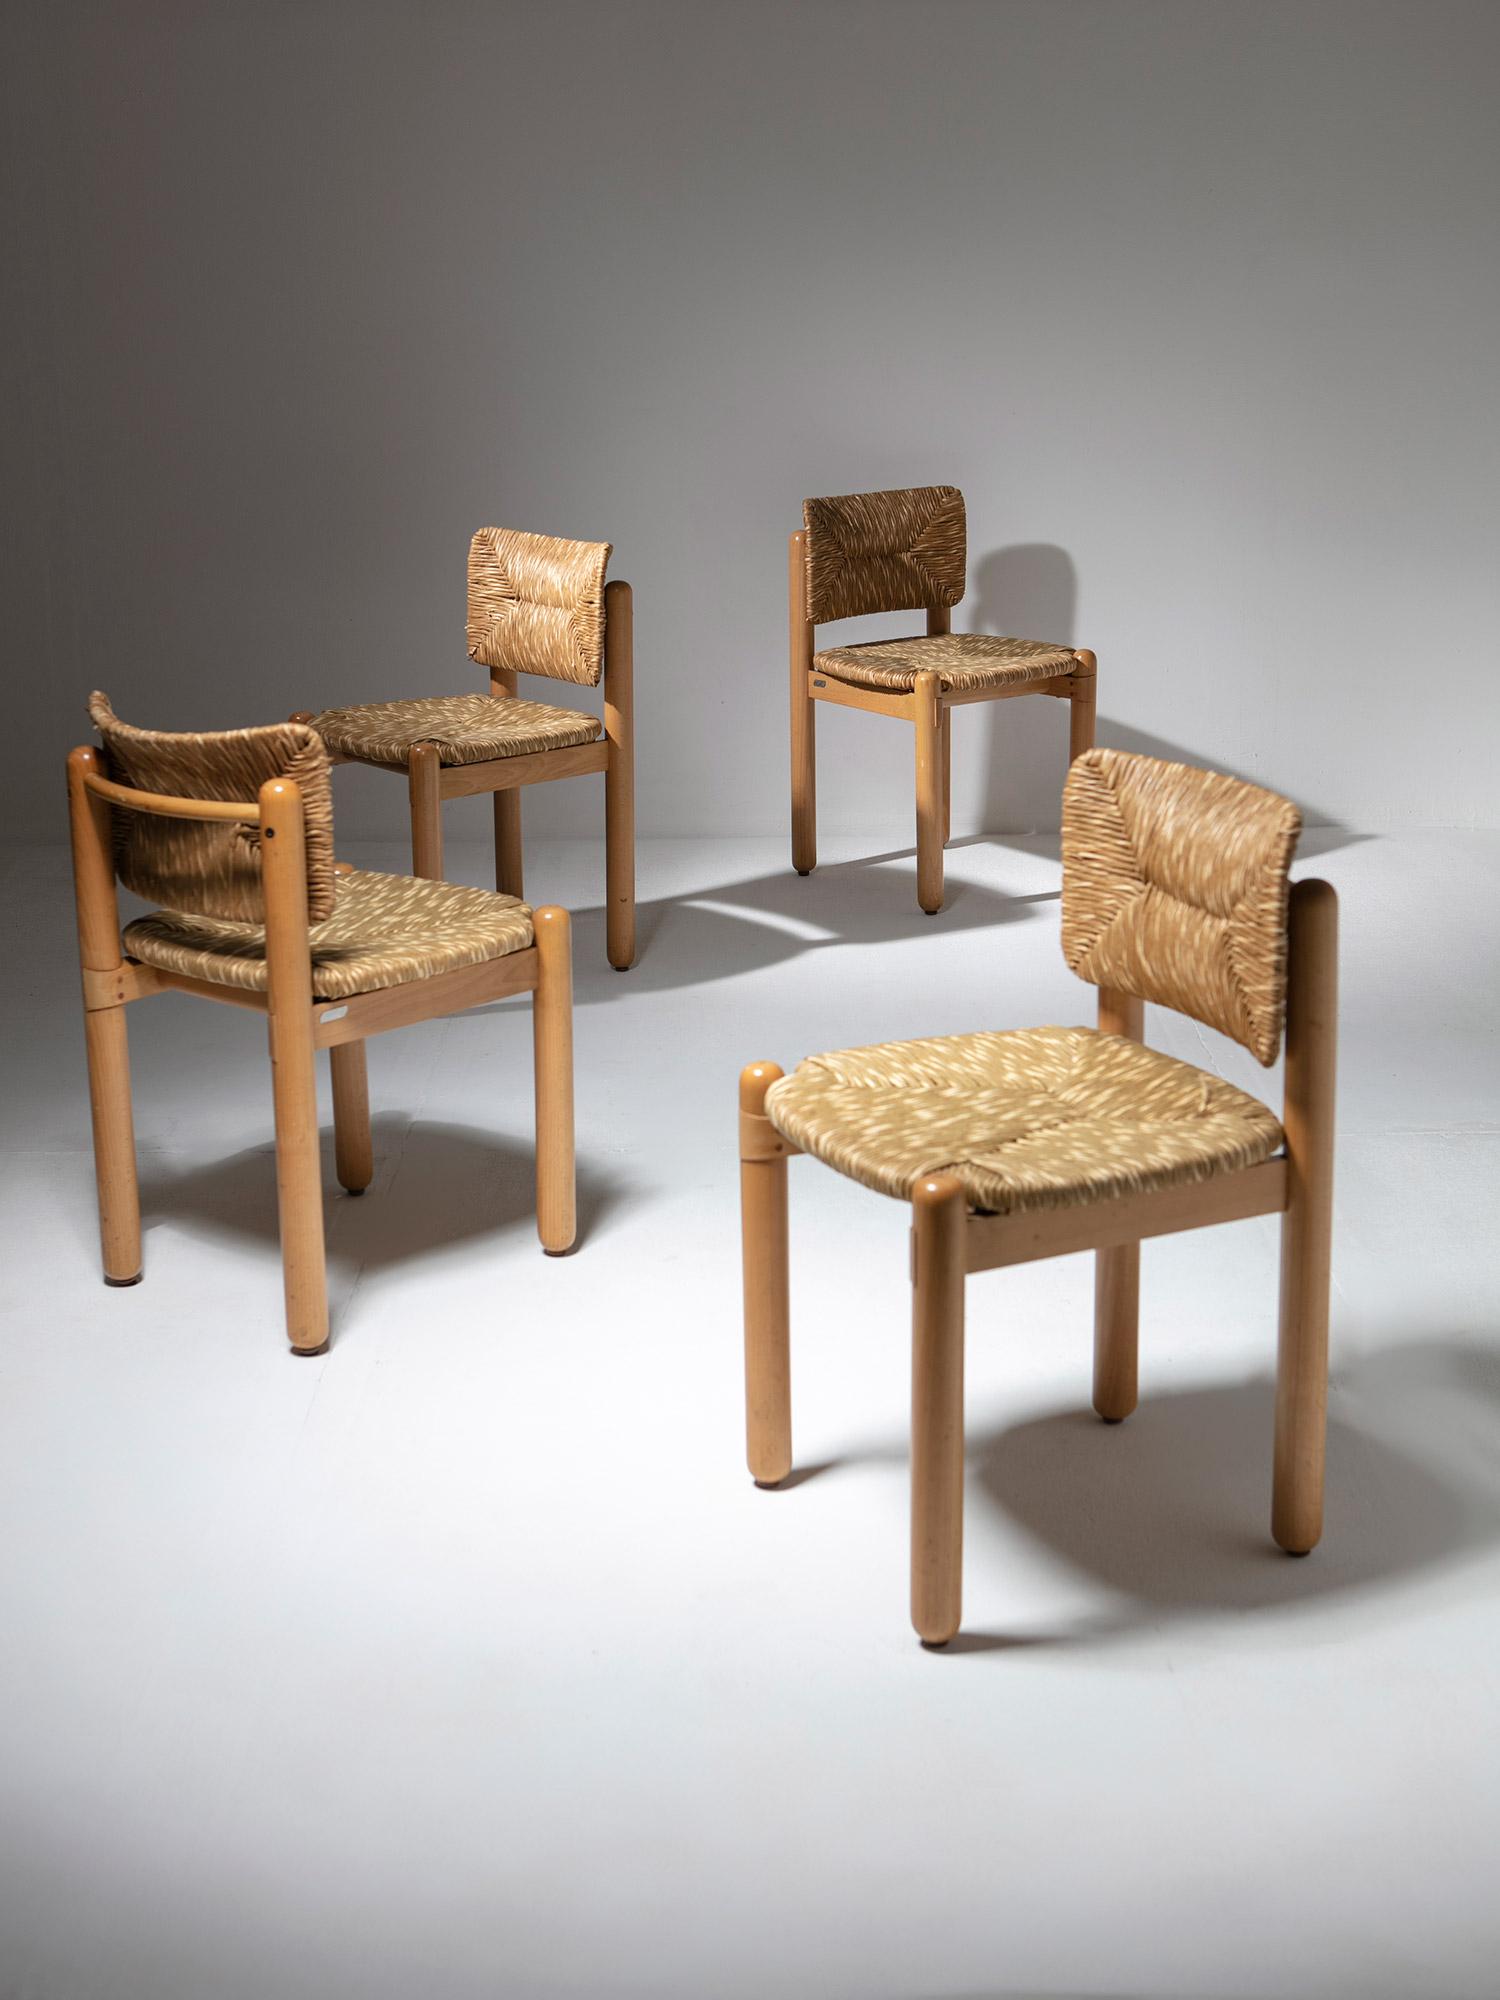 Set of four Baba chairs by Assostudio for Pozzi & Verga.
Chunky beech wood frame and natural fiber weaving pads.